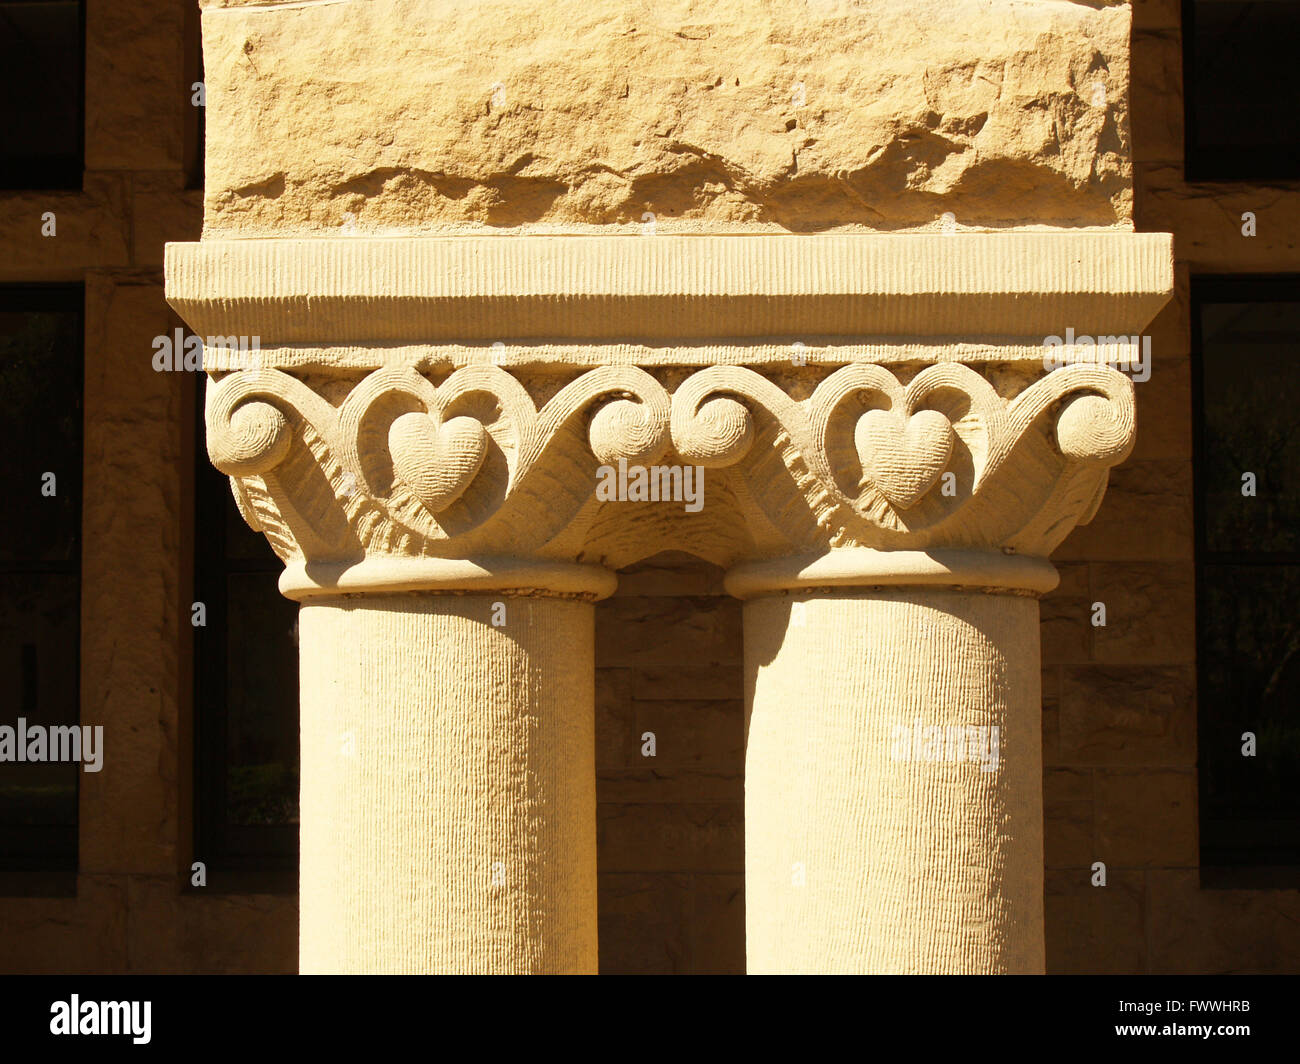 Two column supports with detail showing carvings and texture Stock Photo